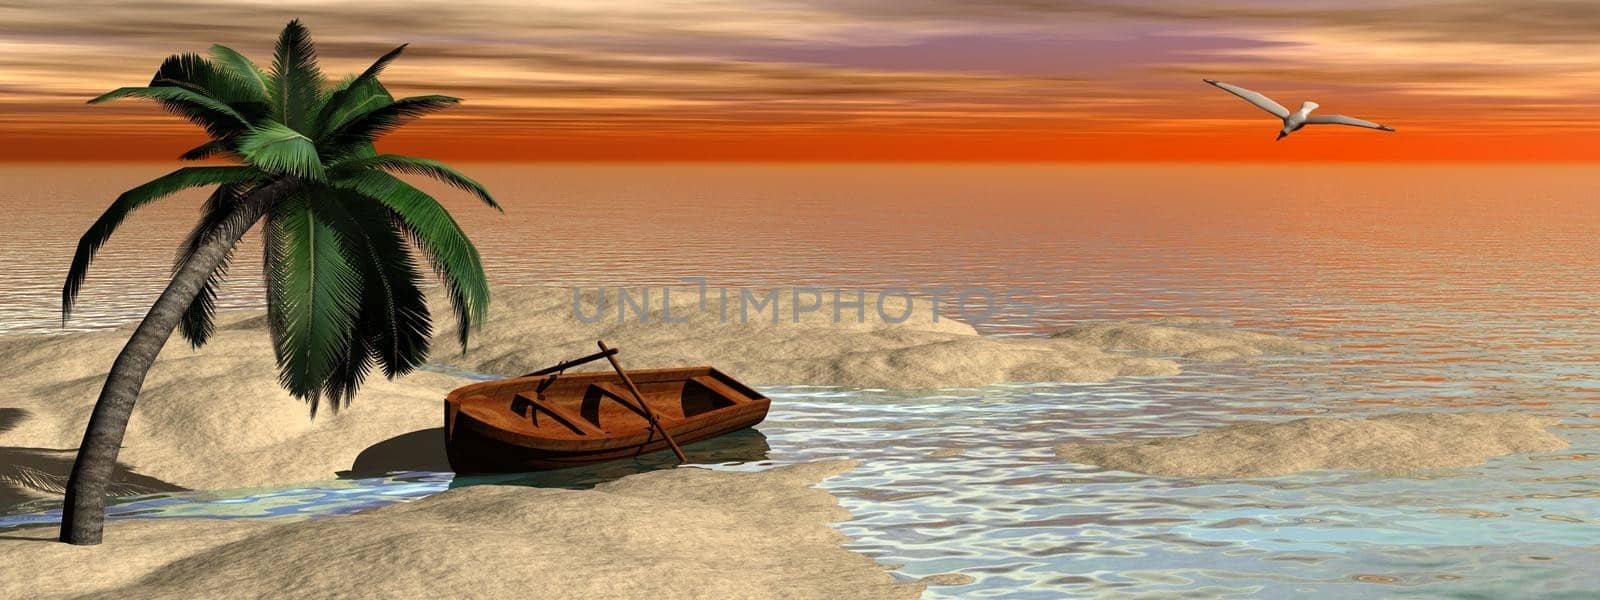 Small old wood boat next to palm tree at the beach by sunset